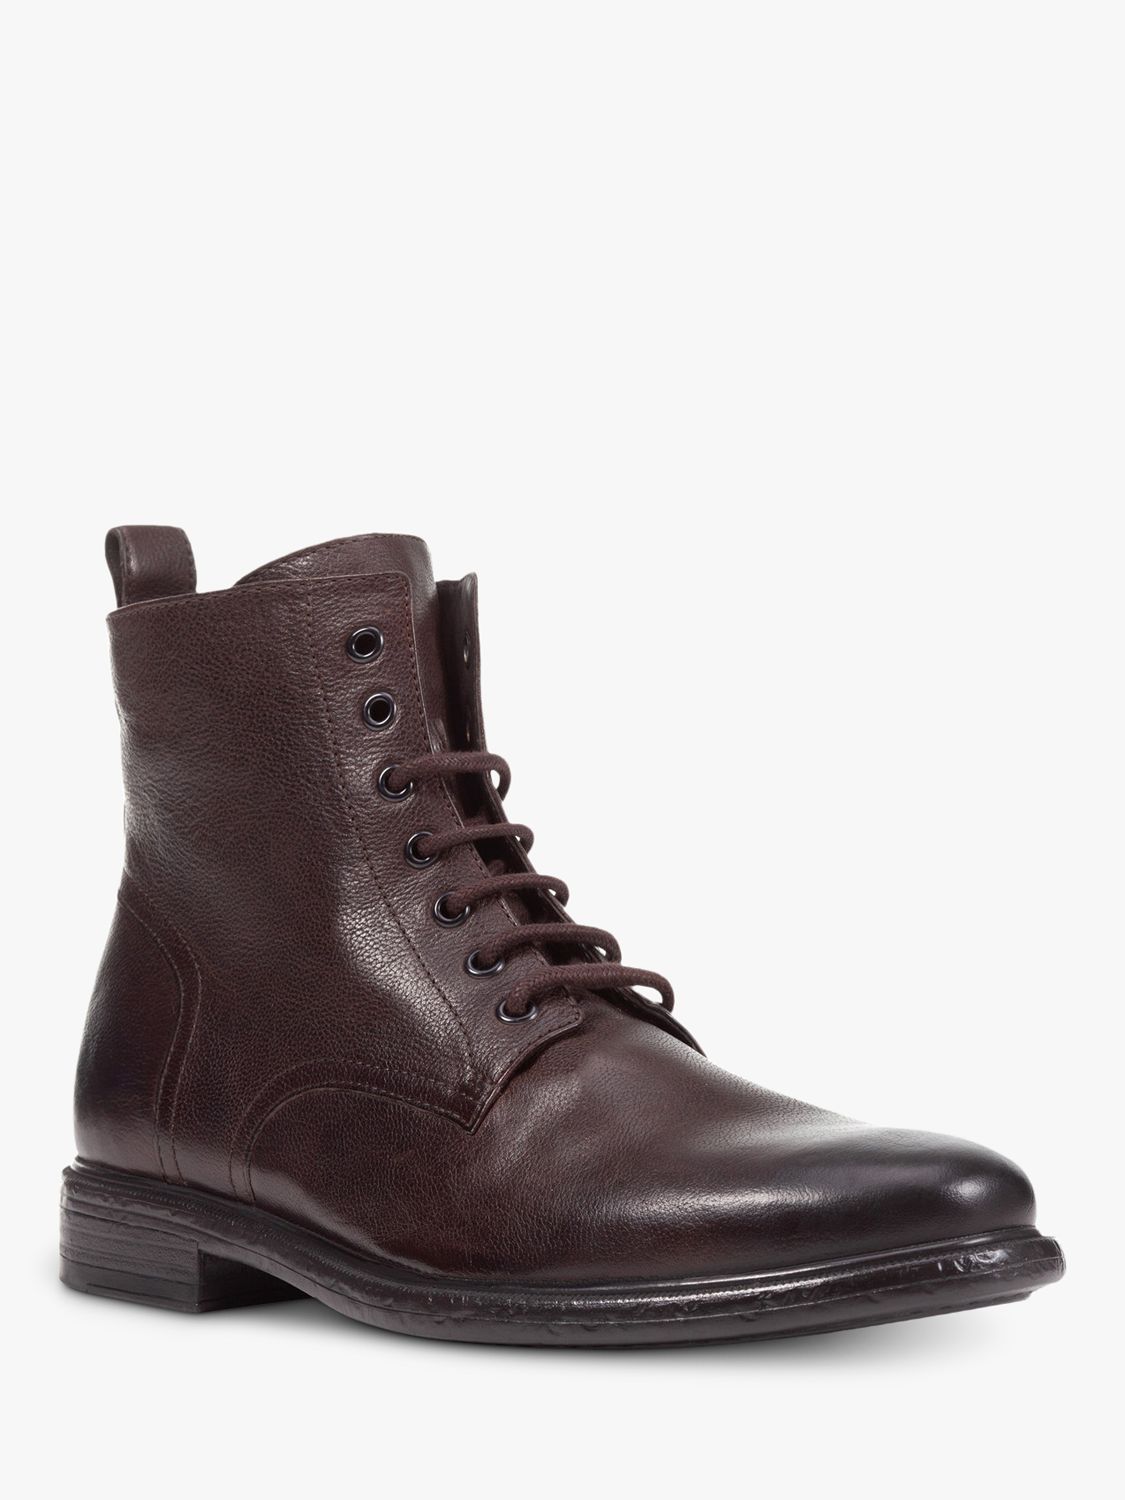 Geox Terence D Leather Lace Up Boots, Coffee